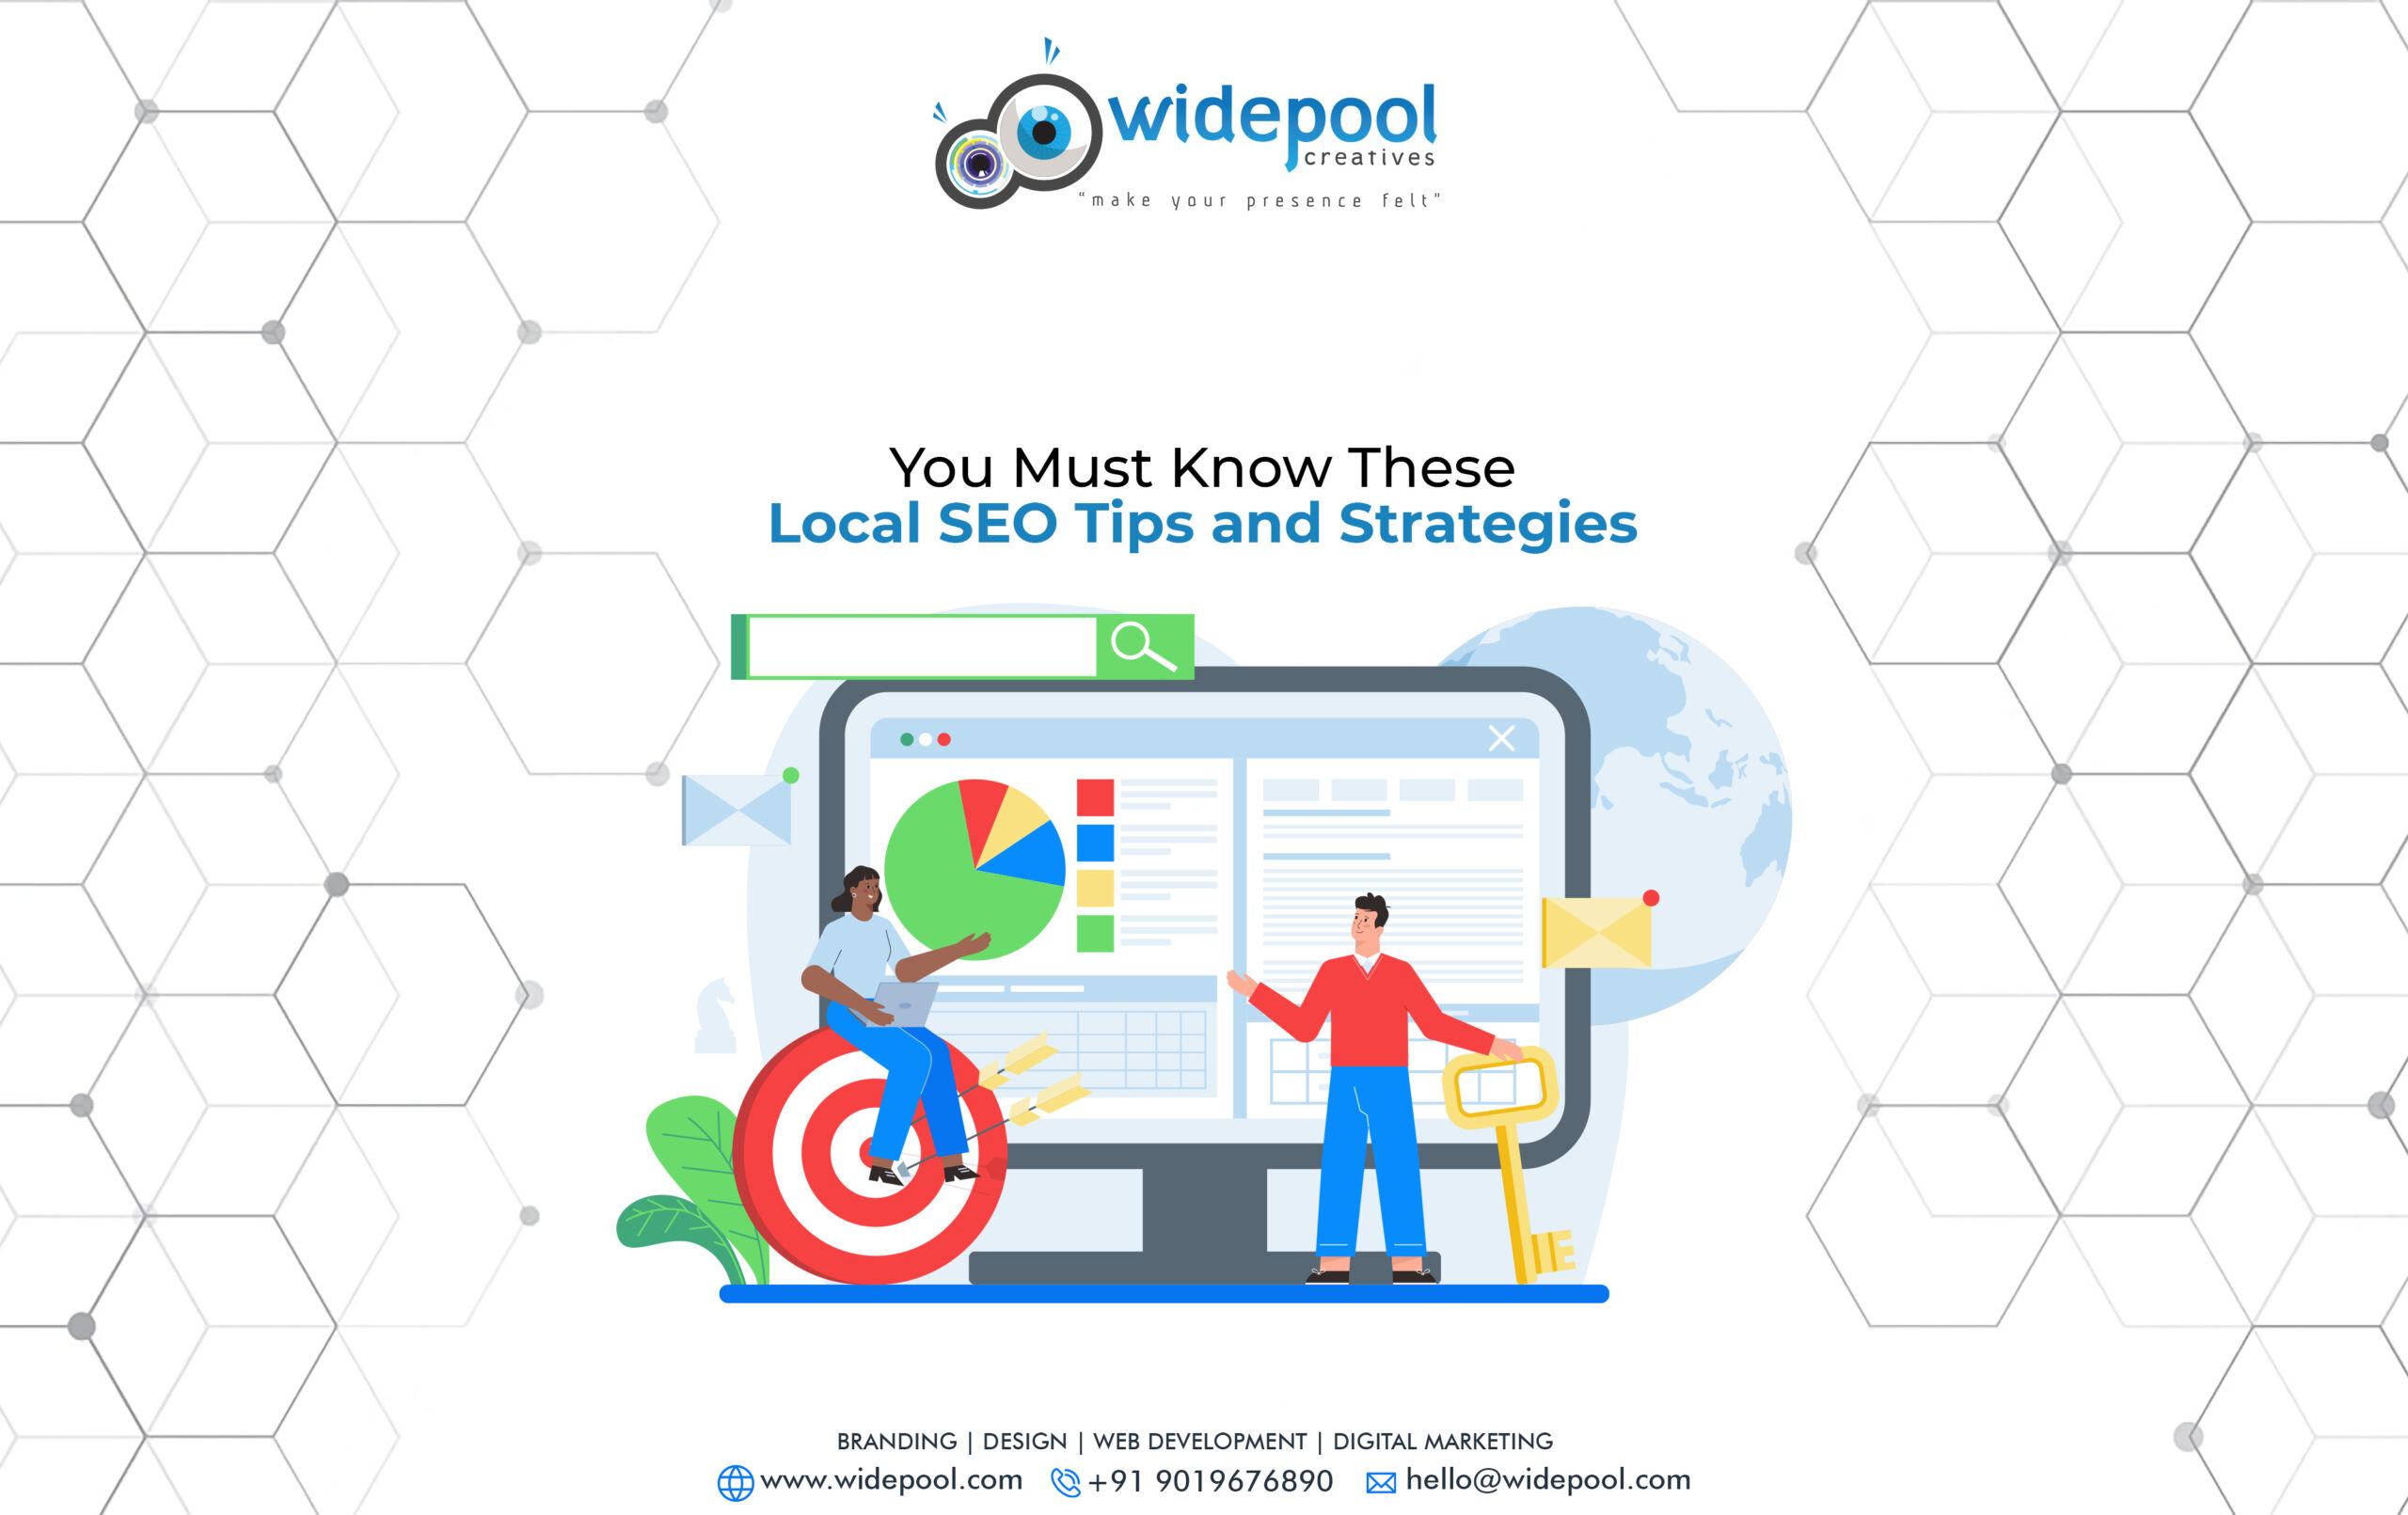 You Must Know These Local SEO Tips and Strategies